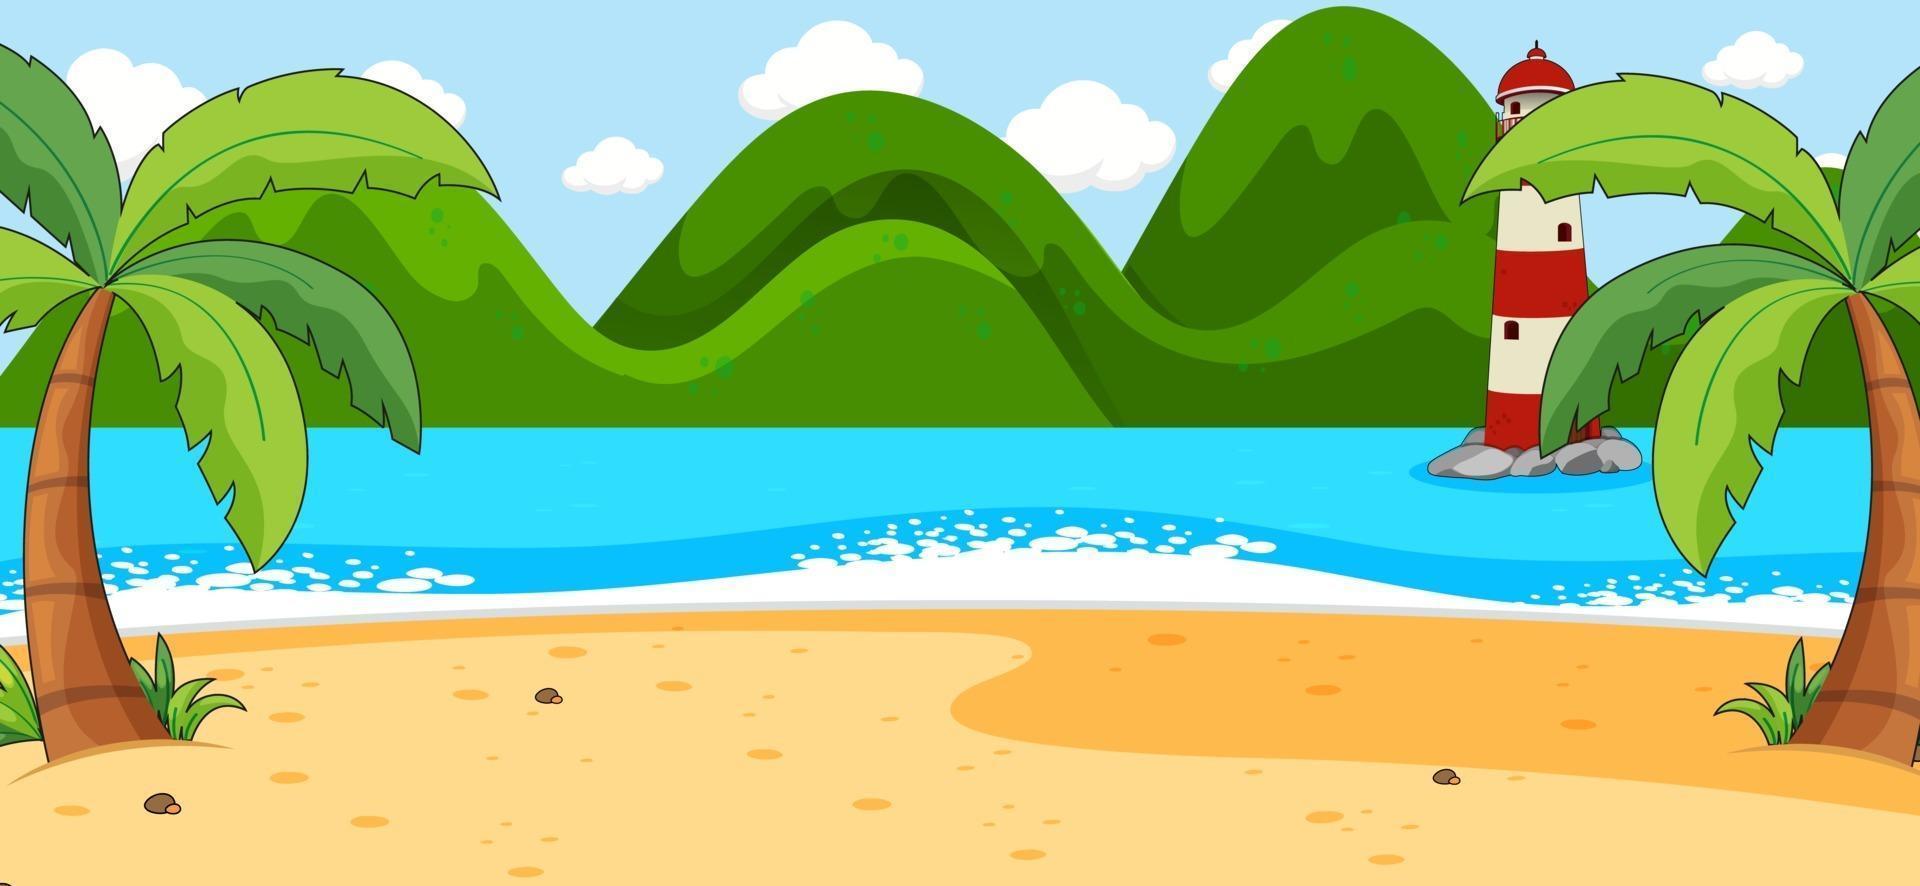 Empty beach scene with coconut trees and mountain in simple style vector